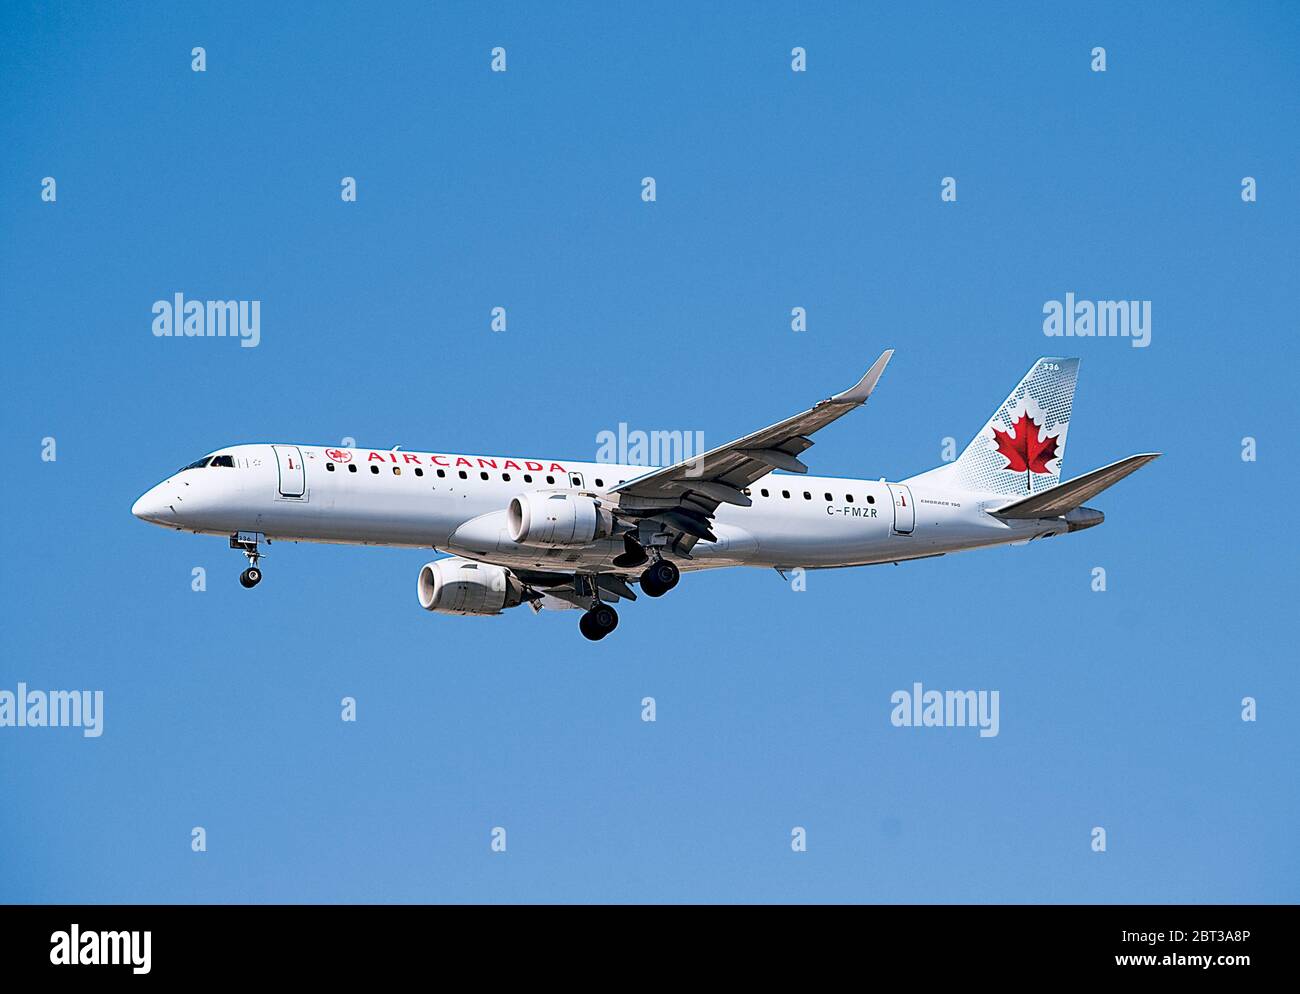 Air Canada Jet Airplane Embraer 190-100IGW C-FMZR Stock Photo